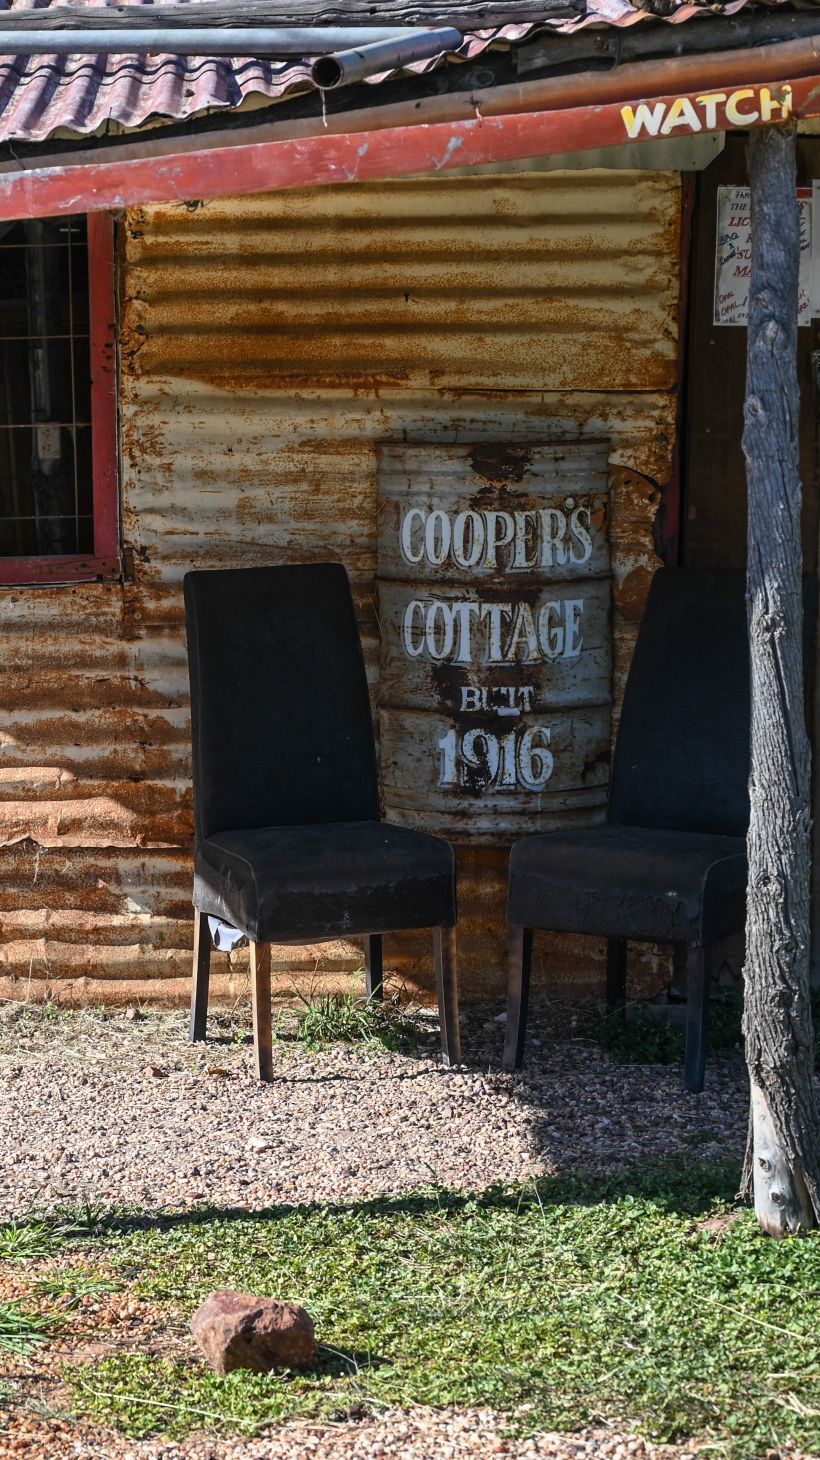 A photo of Coopers Cottage with a sign next to a chair that says "Coopers Cottage 1916".